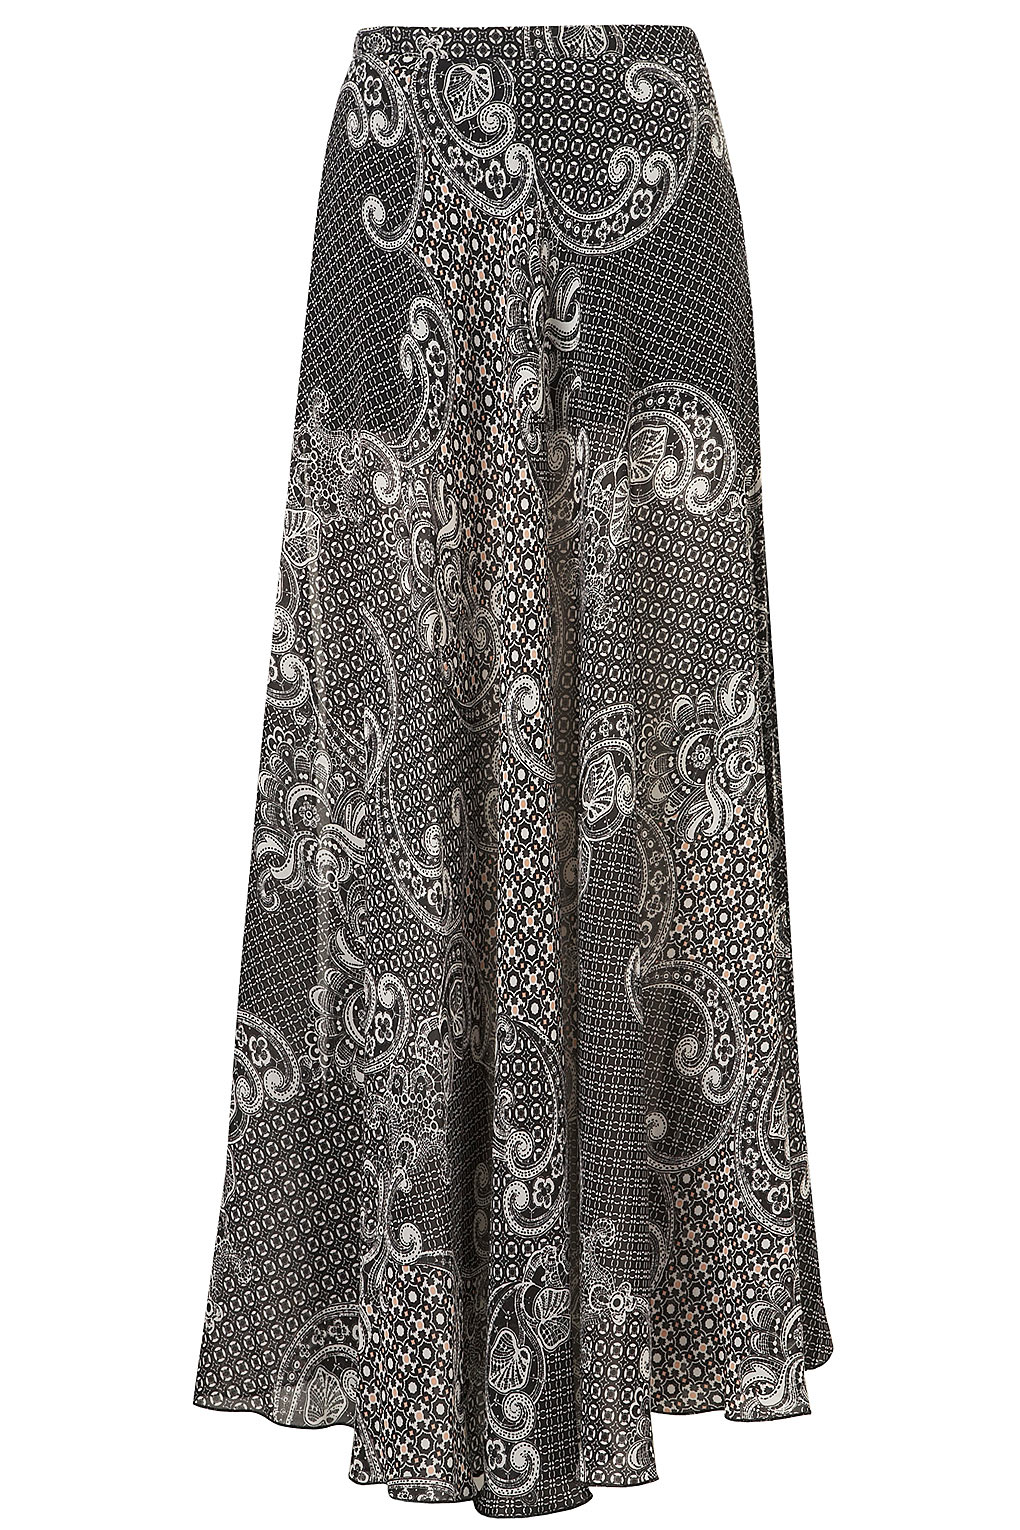 Topshop Paisley Maxi Skirt in Gray | Lyst